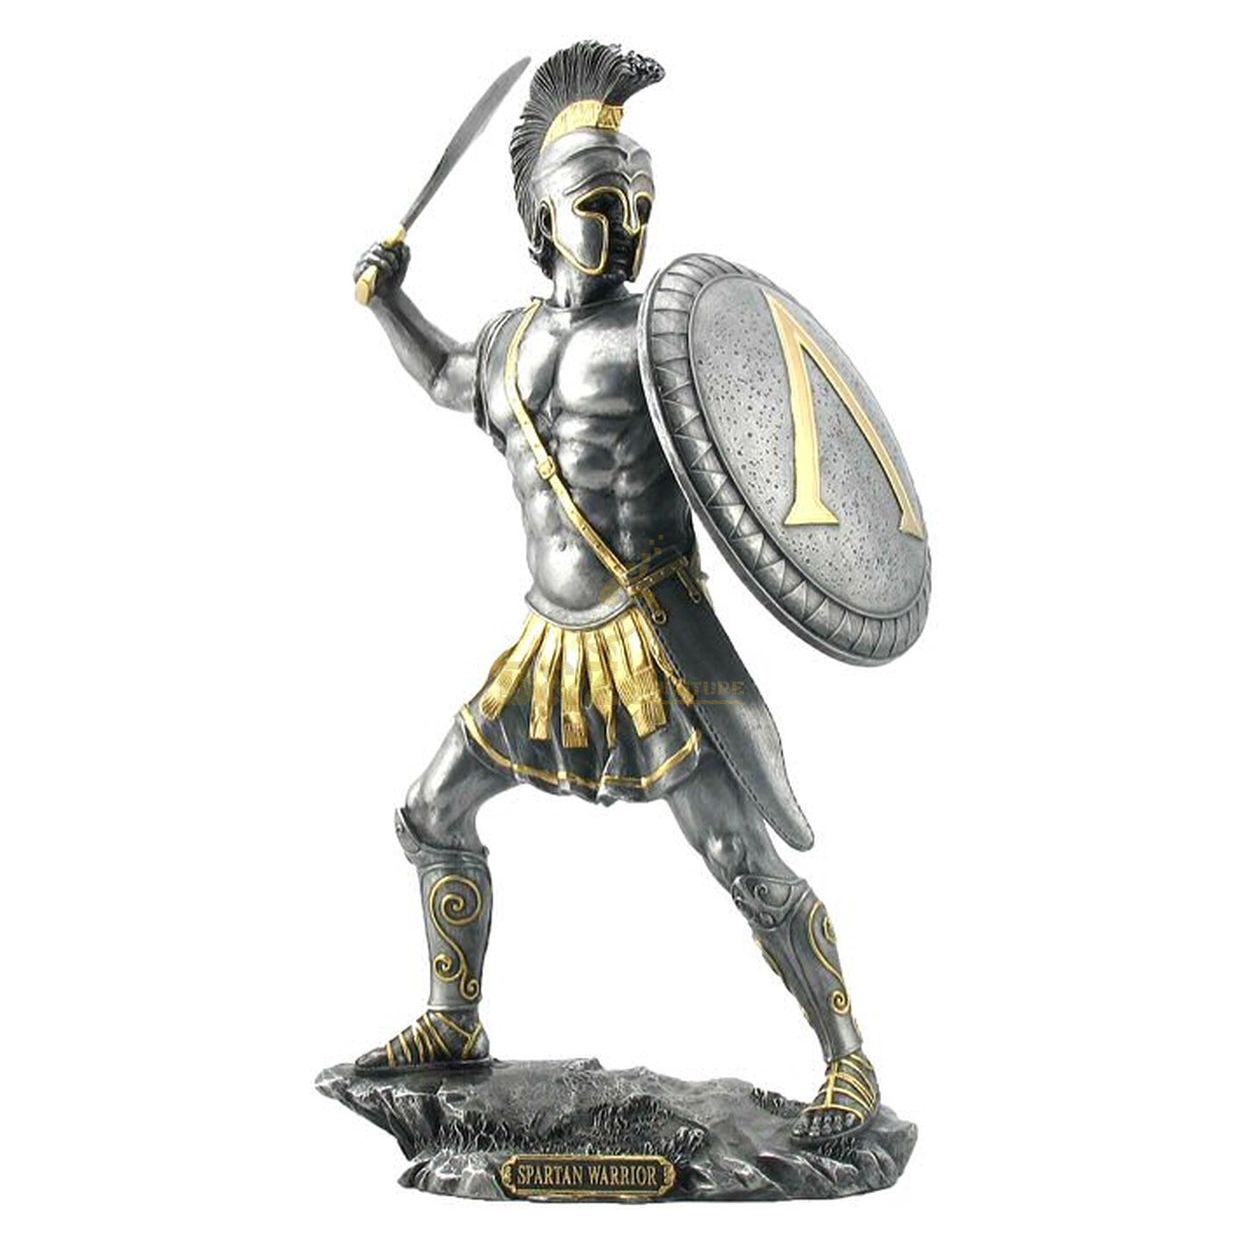 outdoor decor life size metal art casting sparta Warrior antique bronze roman soldiers statue with spear